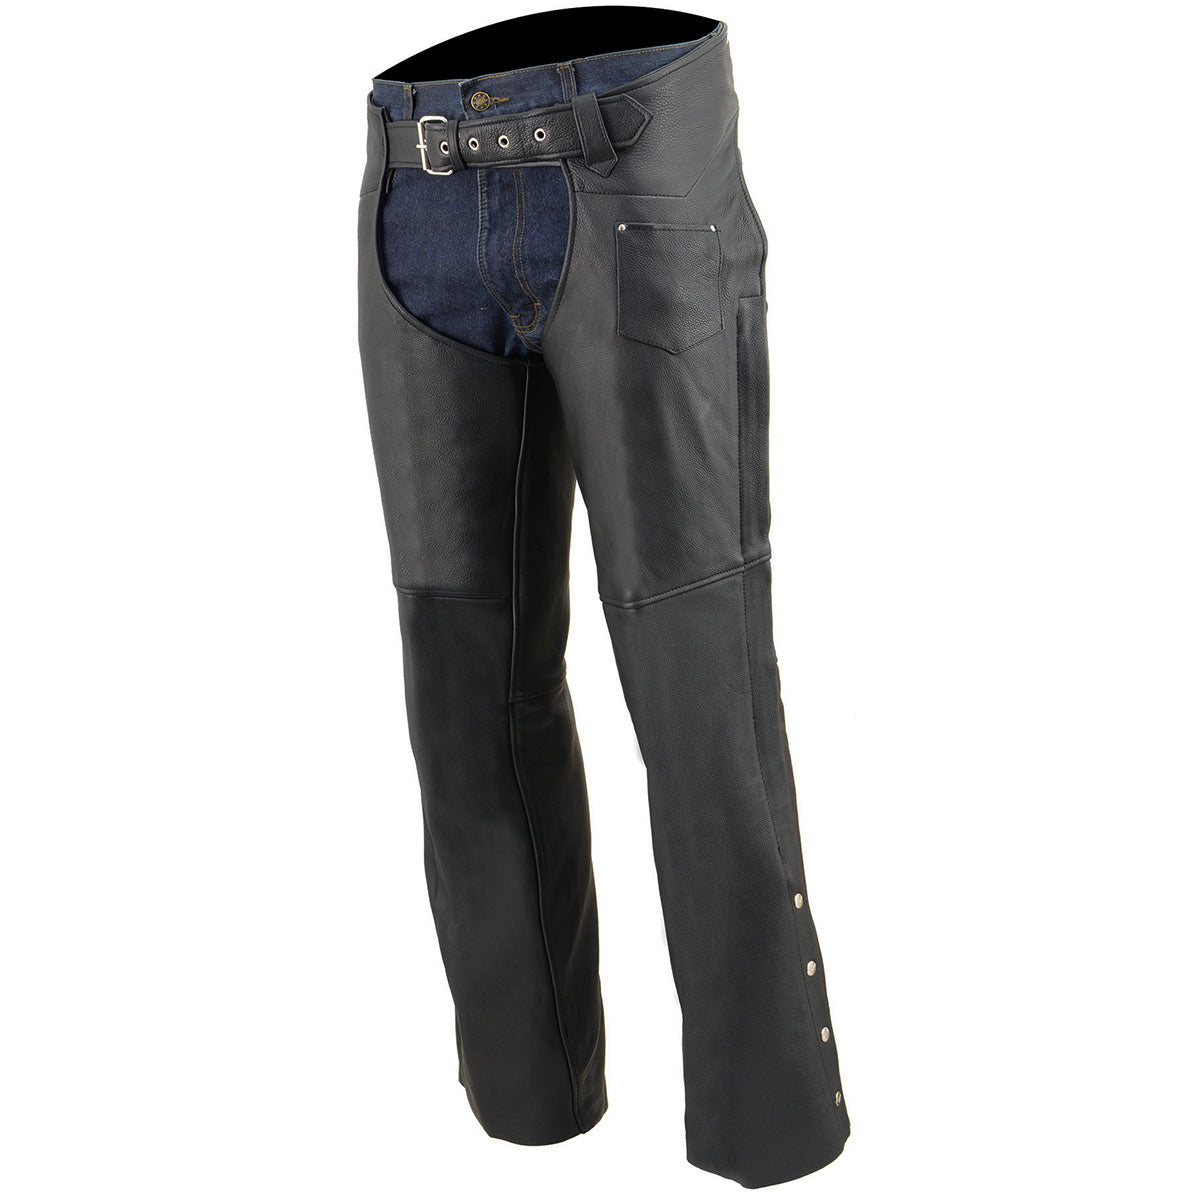 Milwaukee Leather Chaps for Men's Black Naked Soft Leather Fully Lined - Front Coin Pocket Motorcycle Chap - ML1115